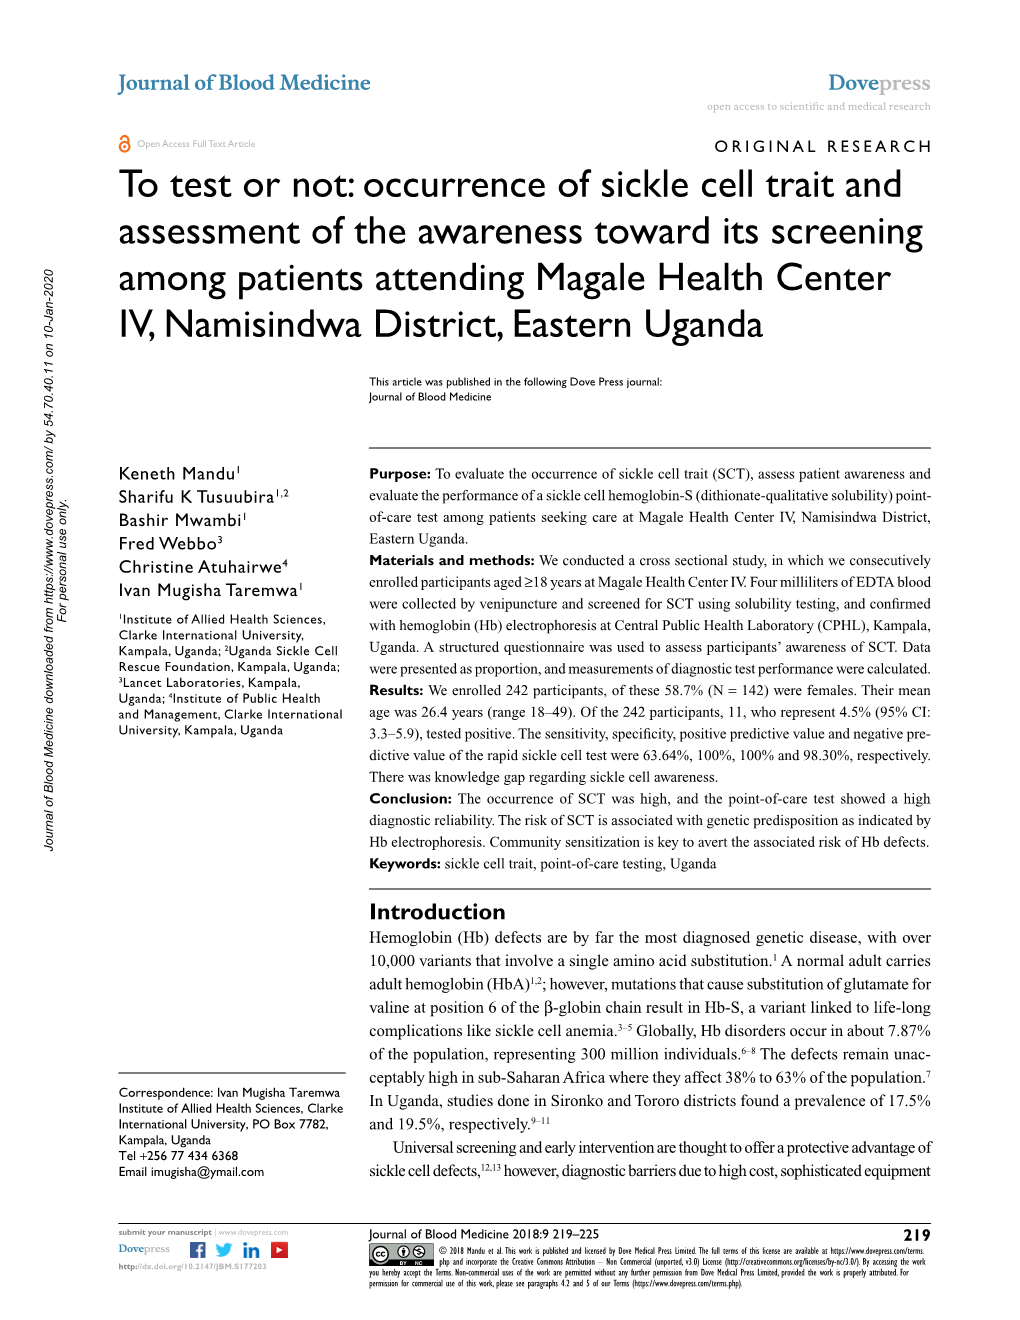 To Test Or Not: Occurrence of Sickle Cell Trait